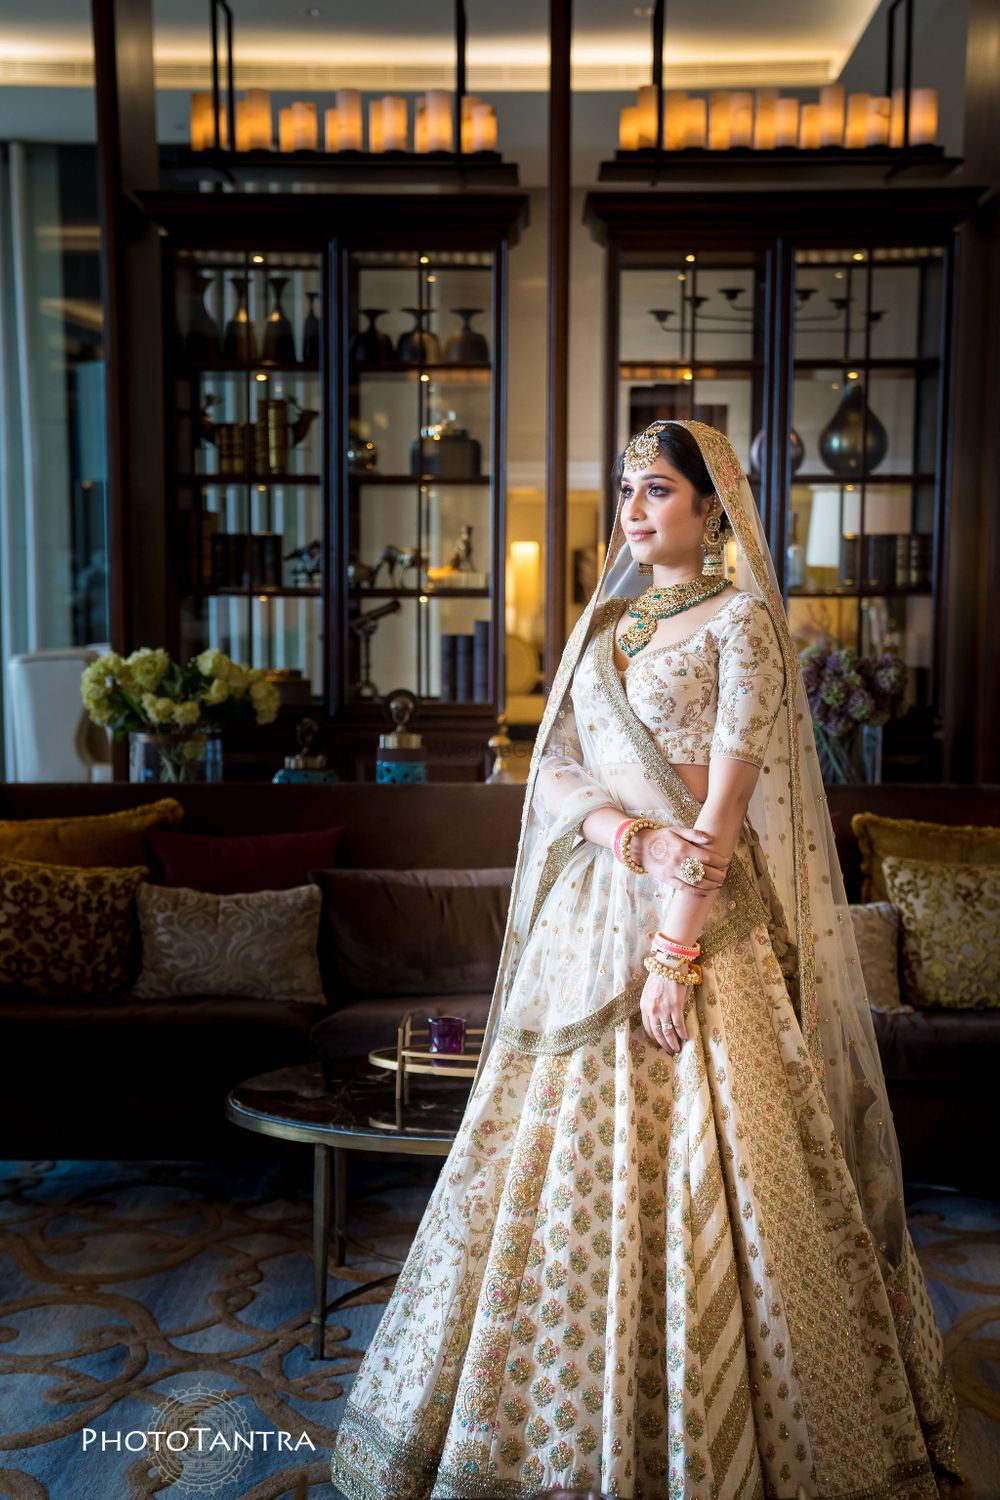 Photo of A bride in an ivory and gold lehenga with double dupatta